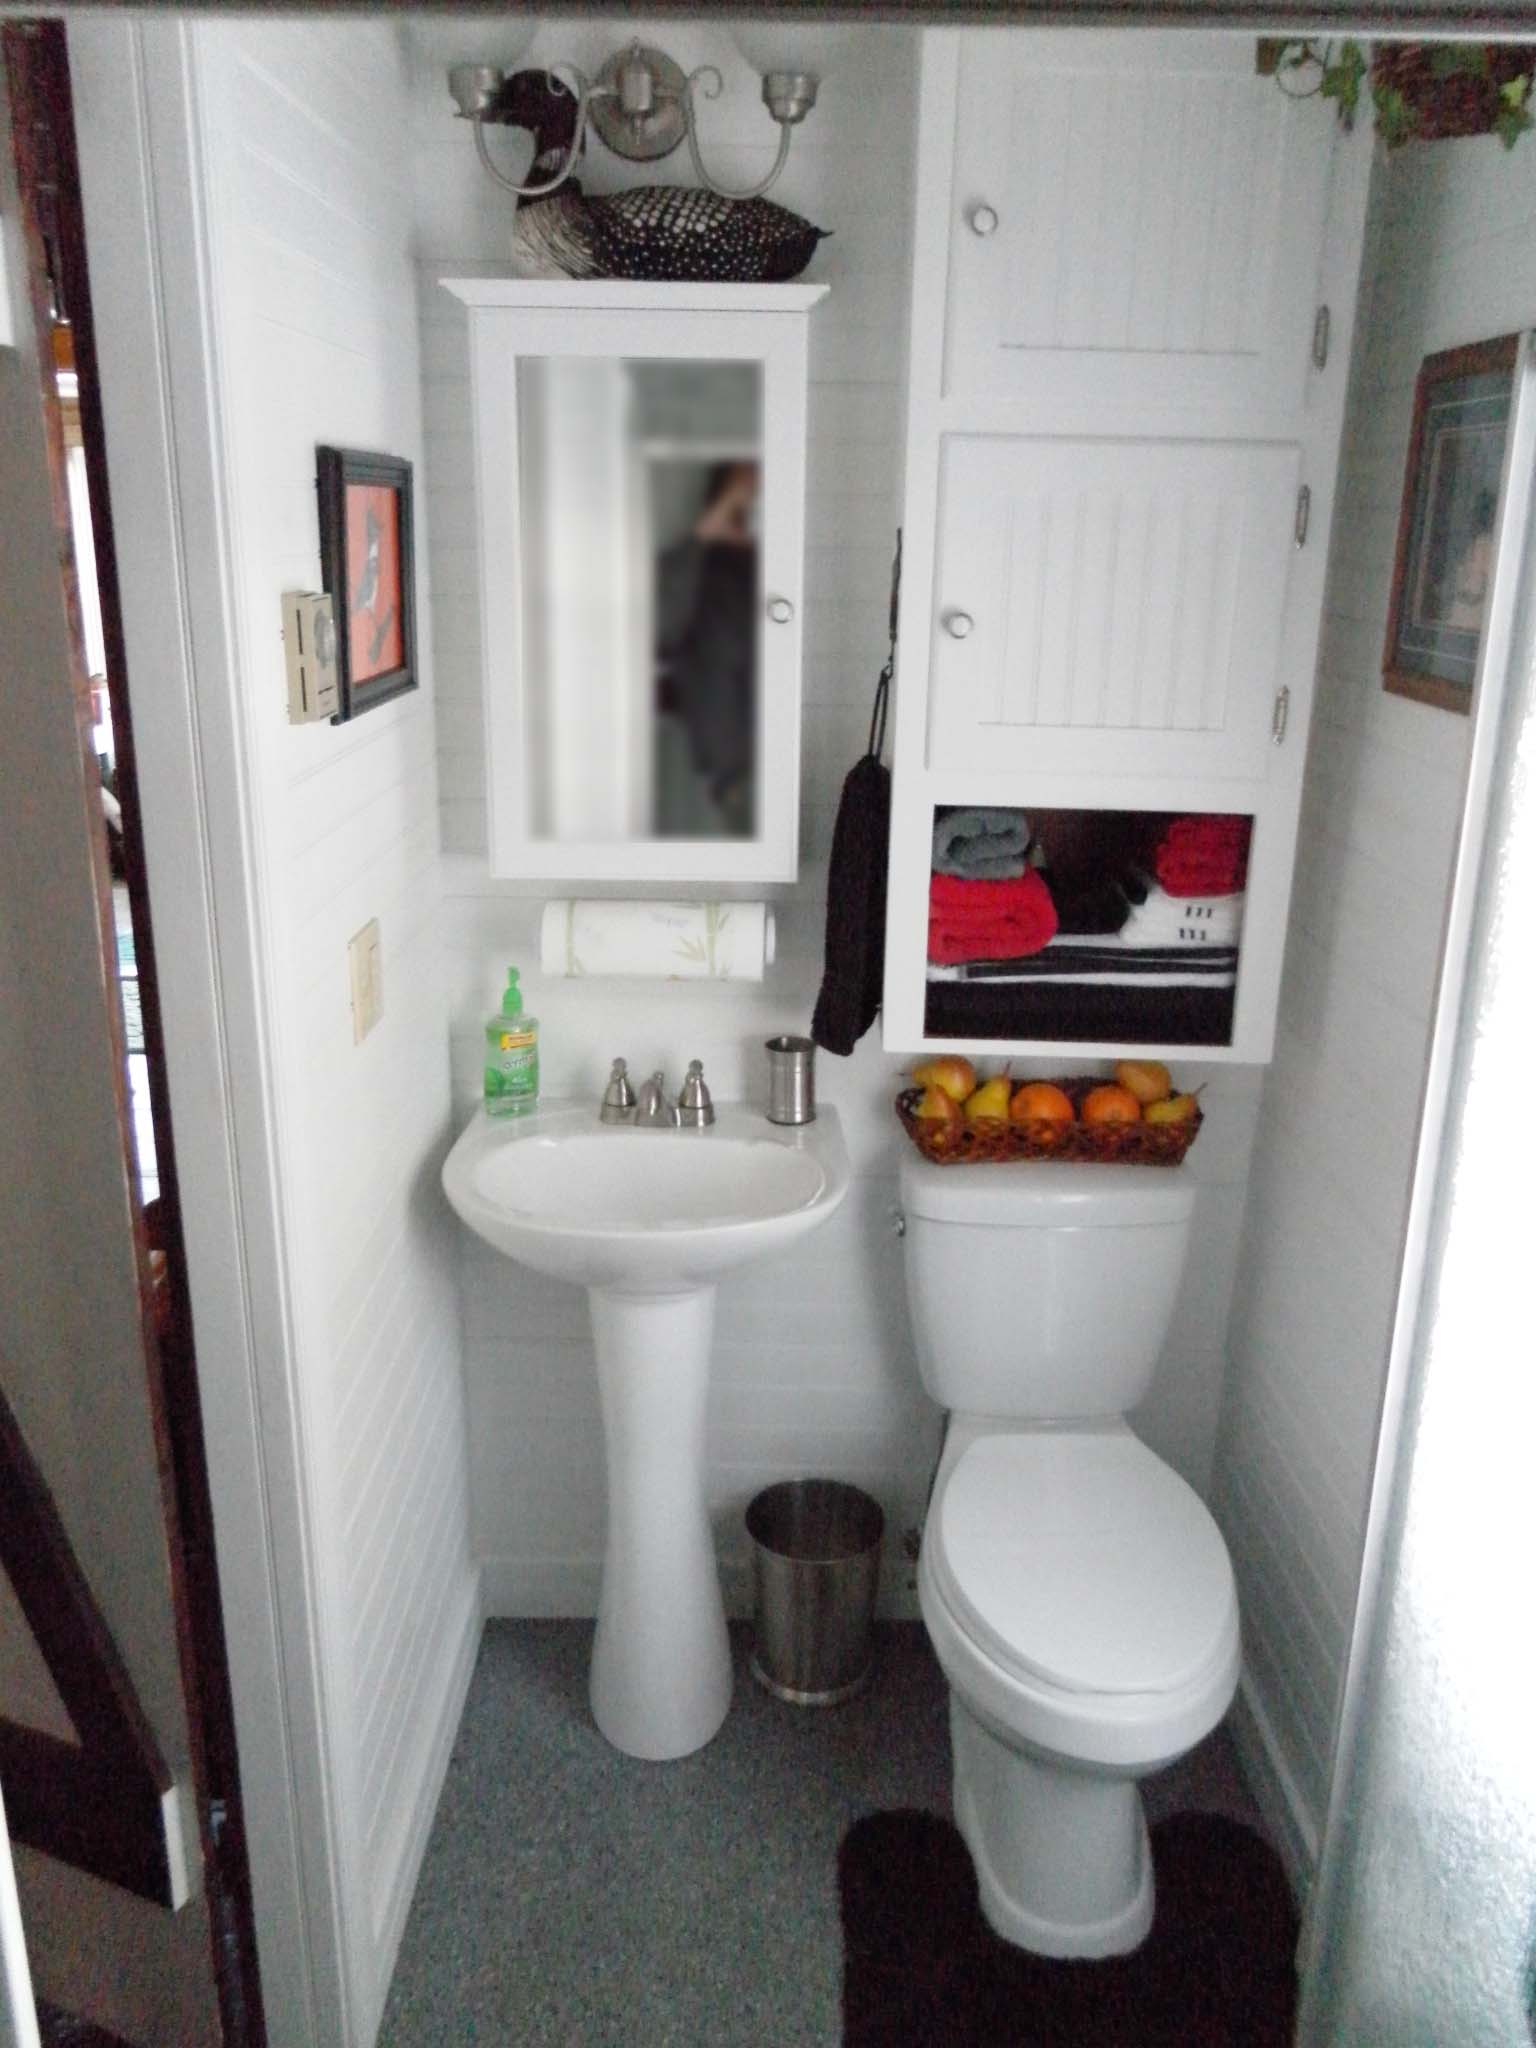 We converted a small closet into a fully functional bathroom with a shower